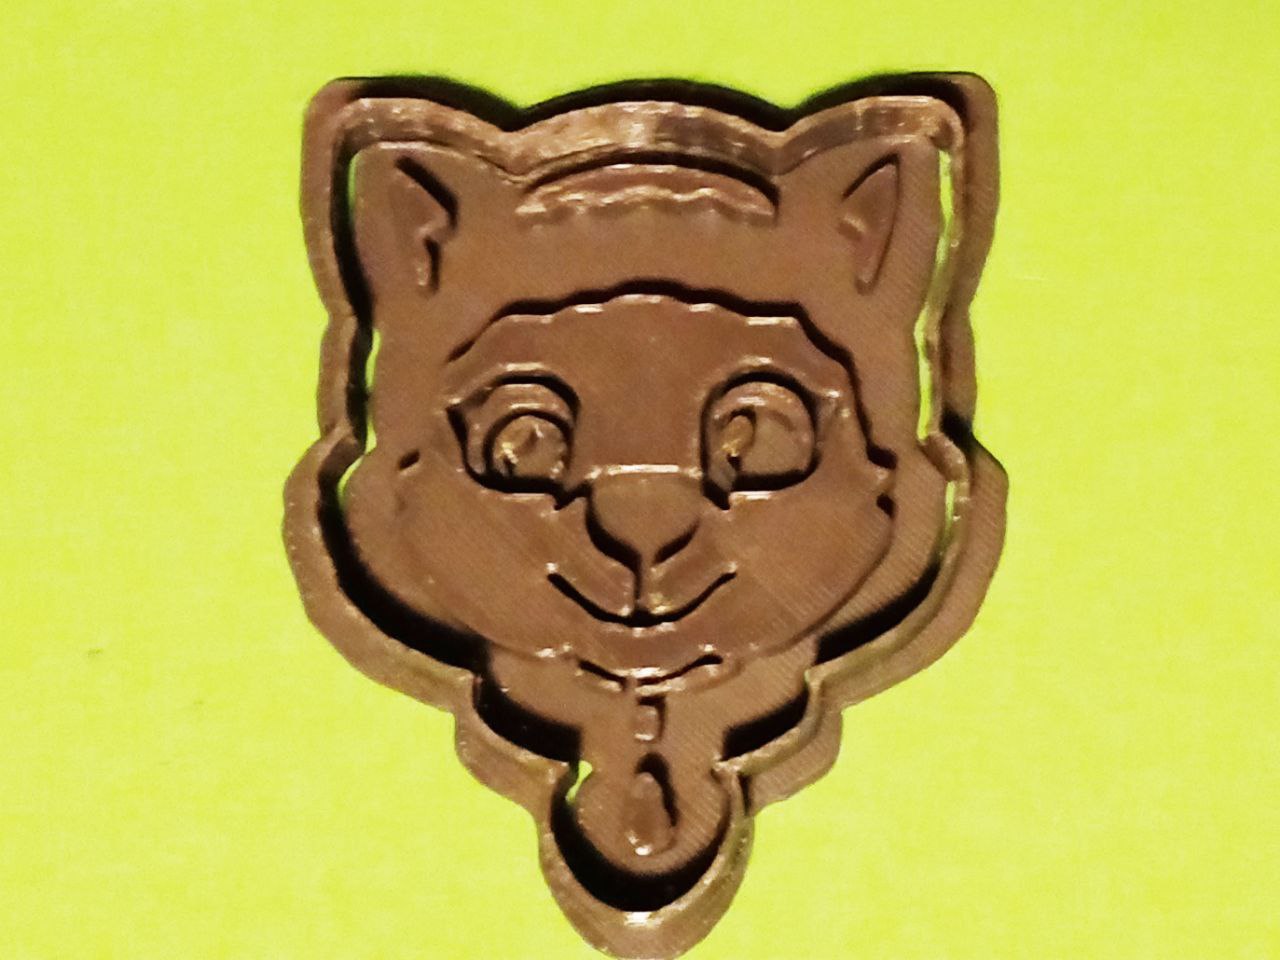 Paw Patrol Everest cookie cutter